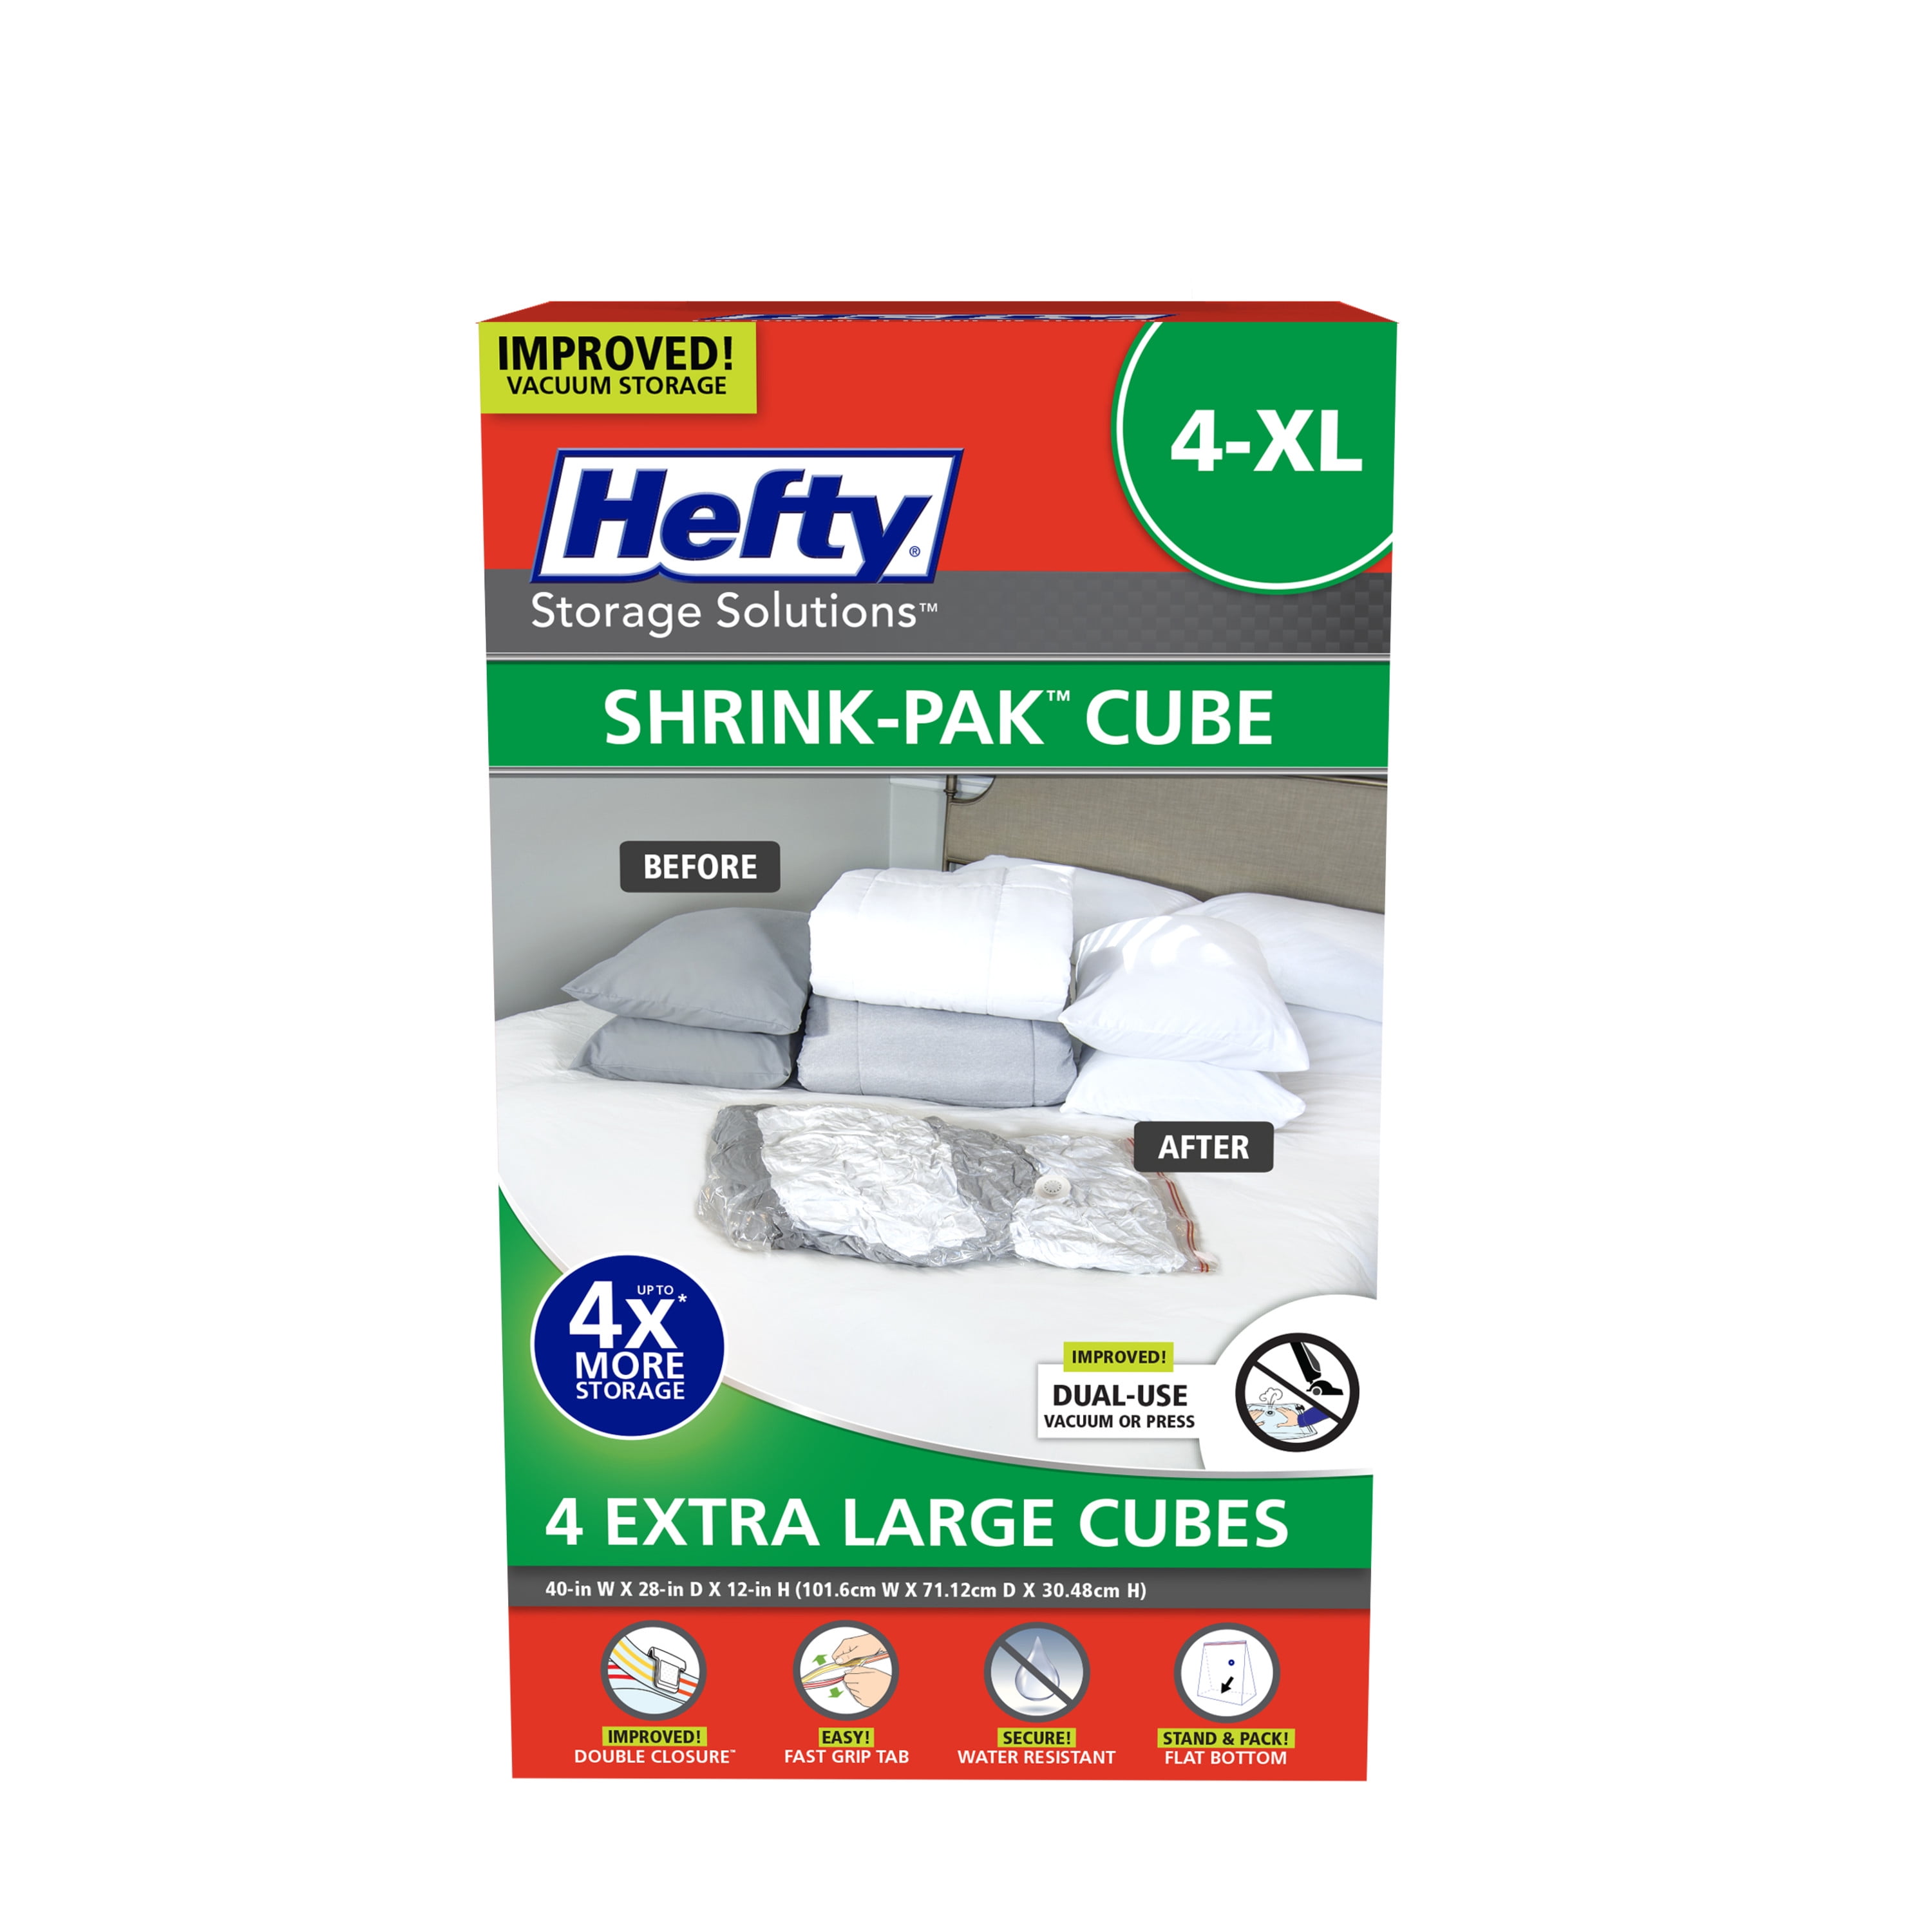 Pack With Boxworks - Pack Mate Cube Vacuum Storage Bags with box shaped  bottom